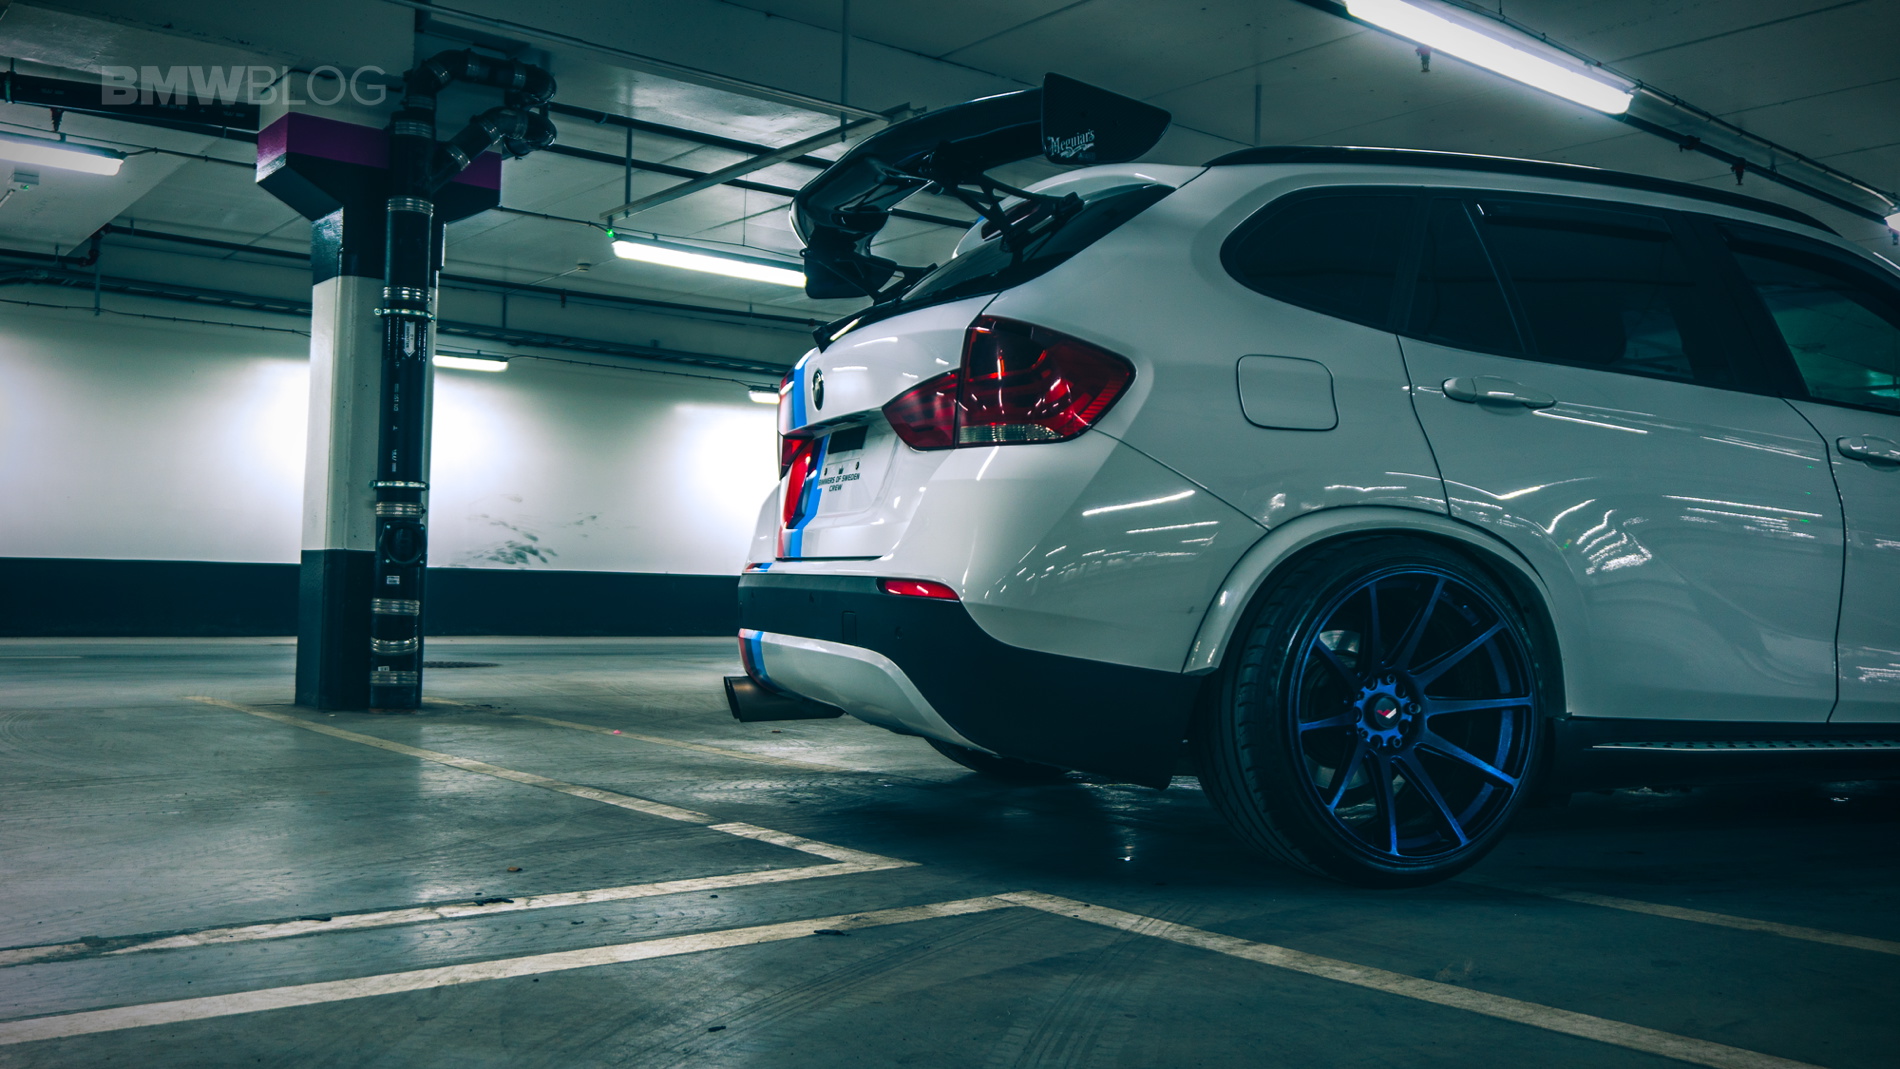 More? Does not work - crazy BMW X1 E84 Widebody on JR11 Alu's